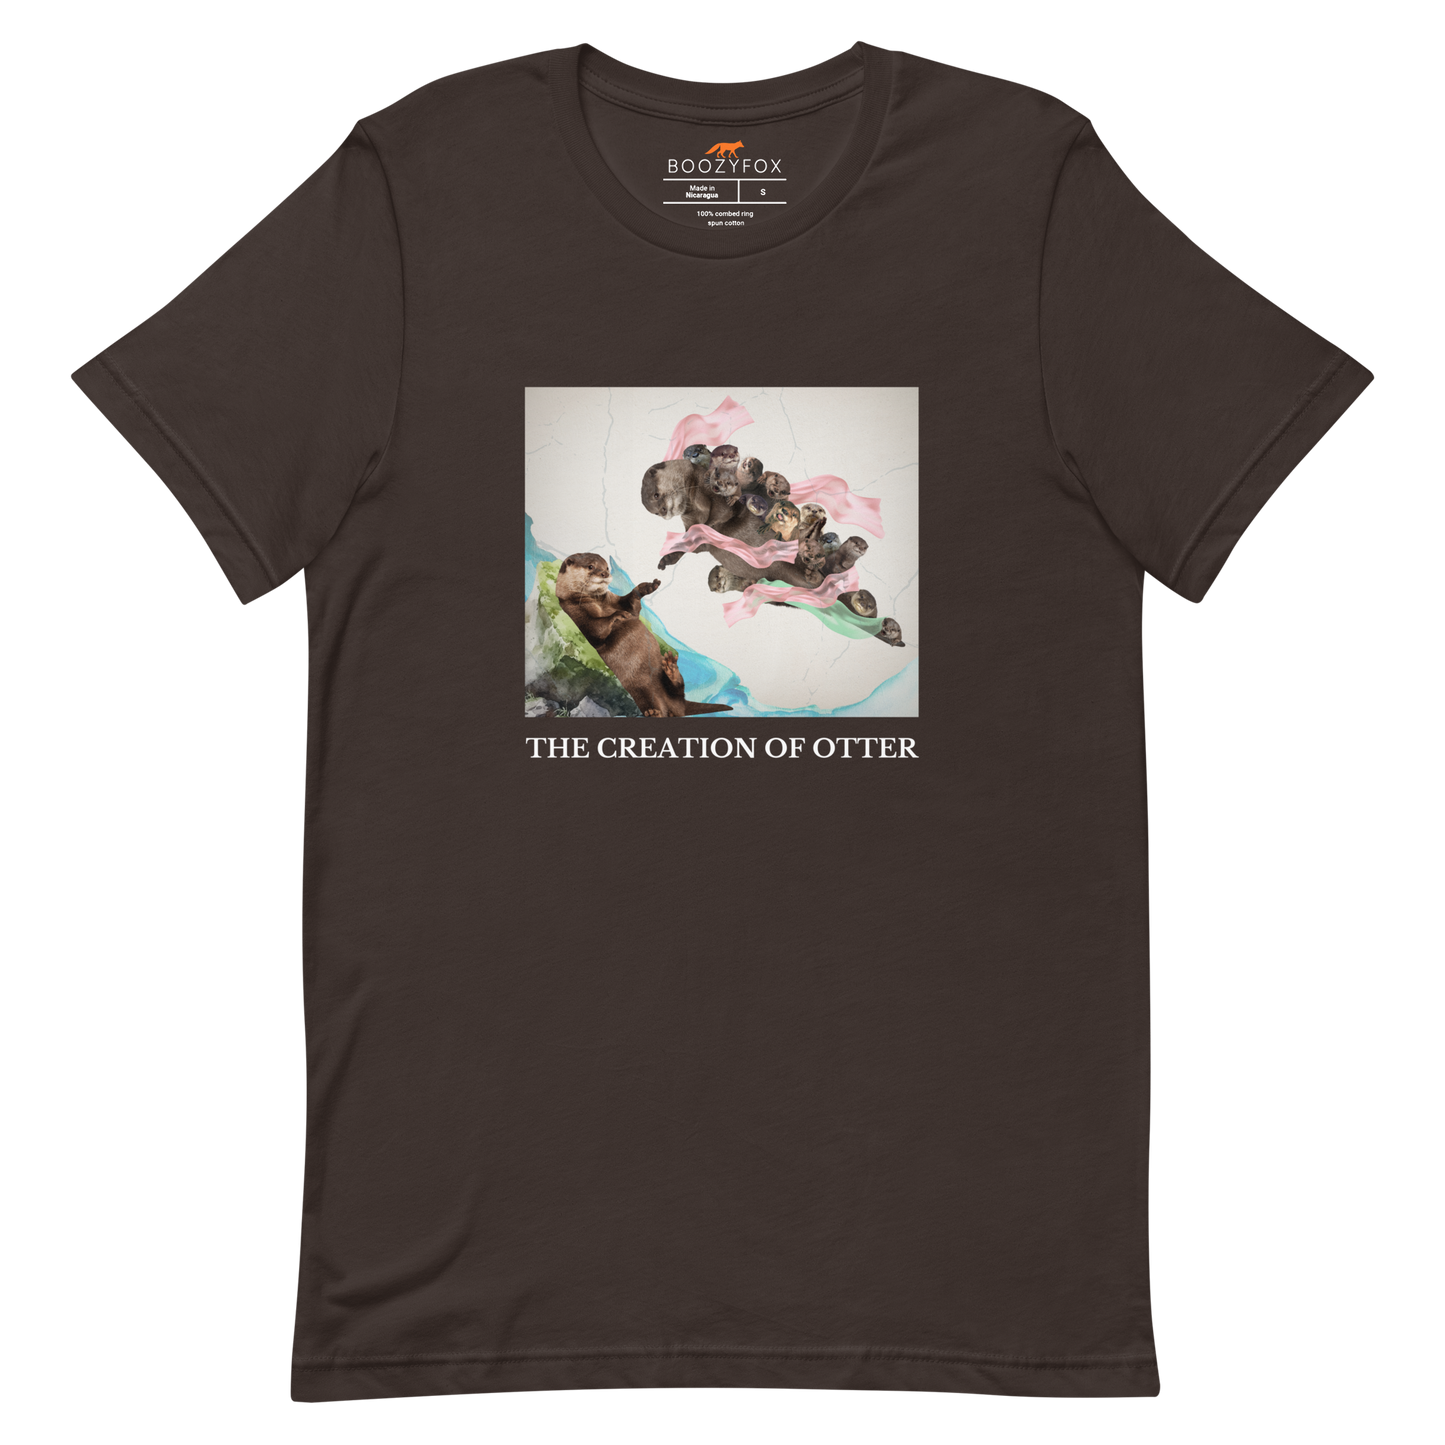 Brown Premium Otter Tee featuring a playful The Creation of Otter parody of Michelangelo's masterpiece - Artsy/Funny Graphic Otter Tees - Boozy Fox